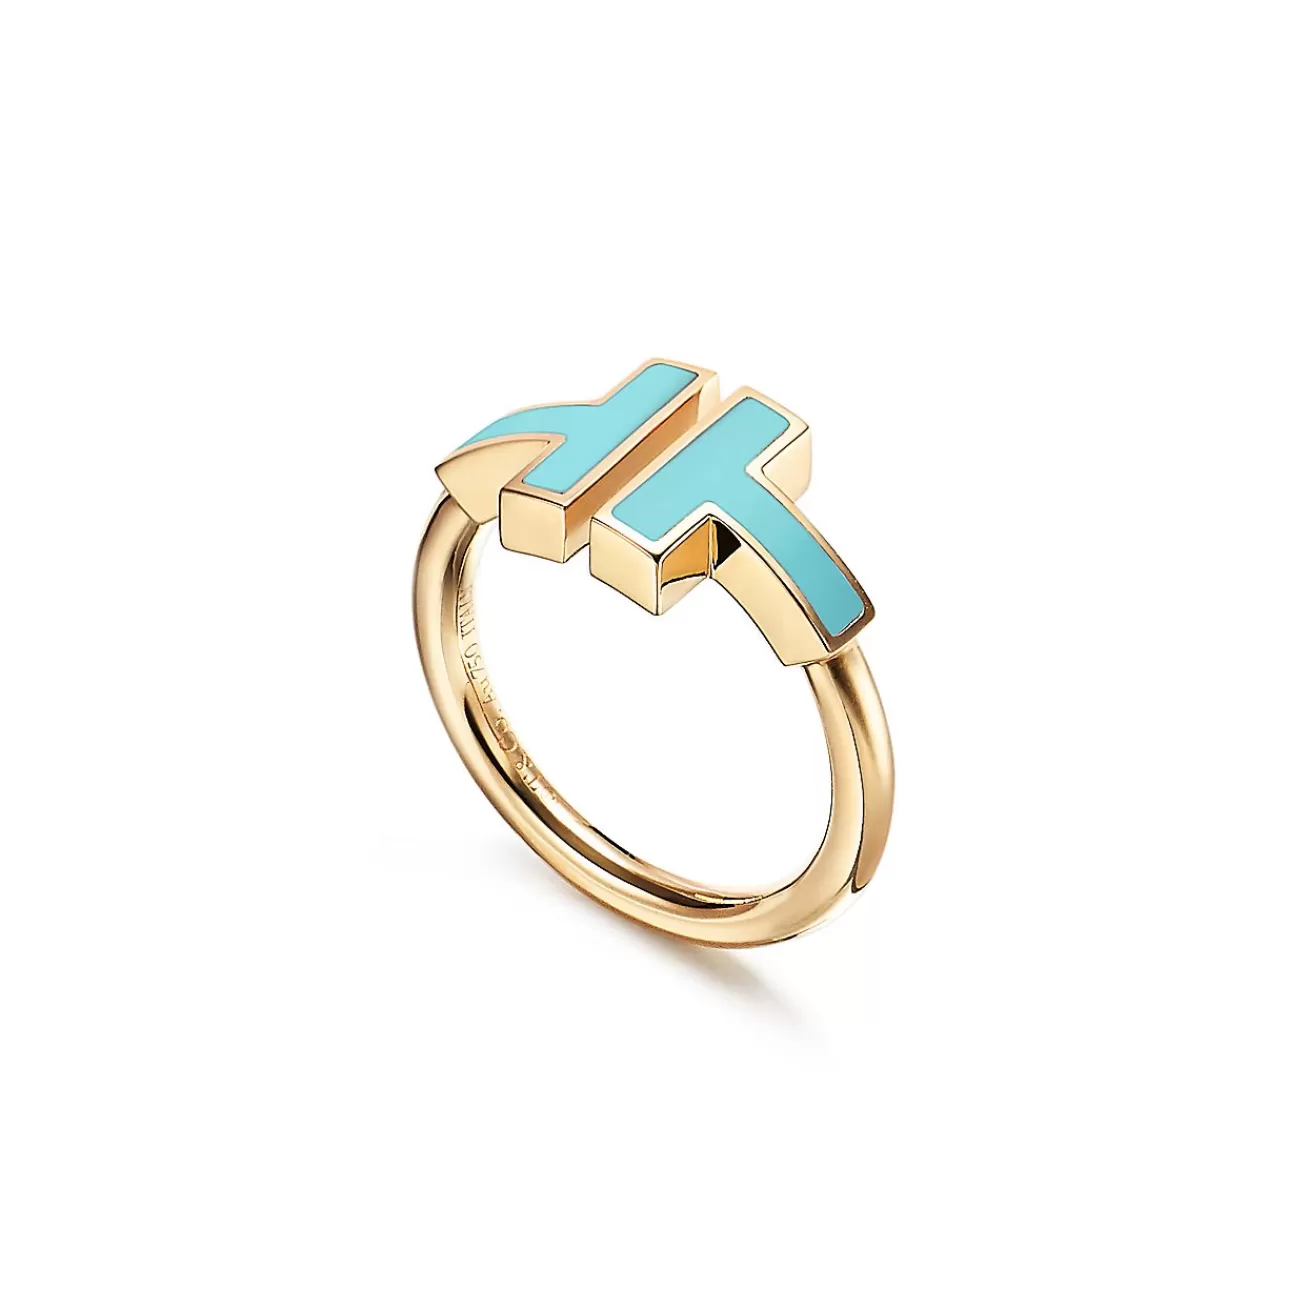 Tiffany & Co. Tiffany T turquoise wire ring in 18k gold. | ^ Rings | Gold Jewelry